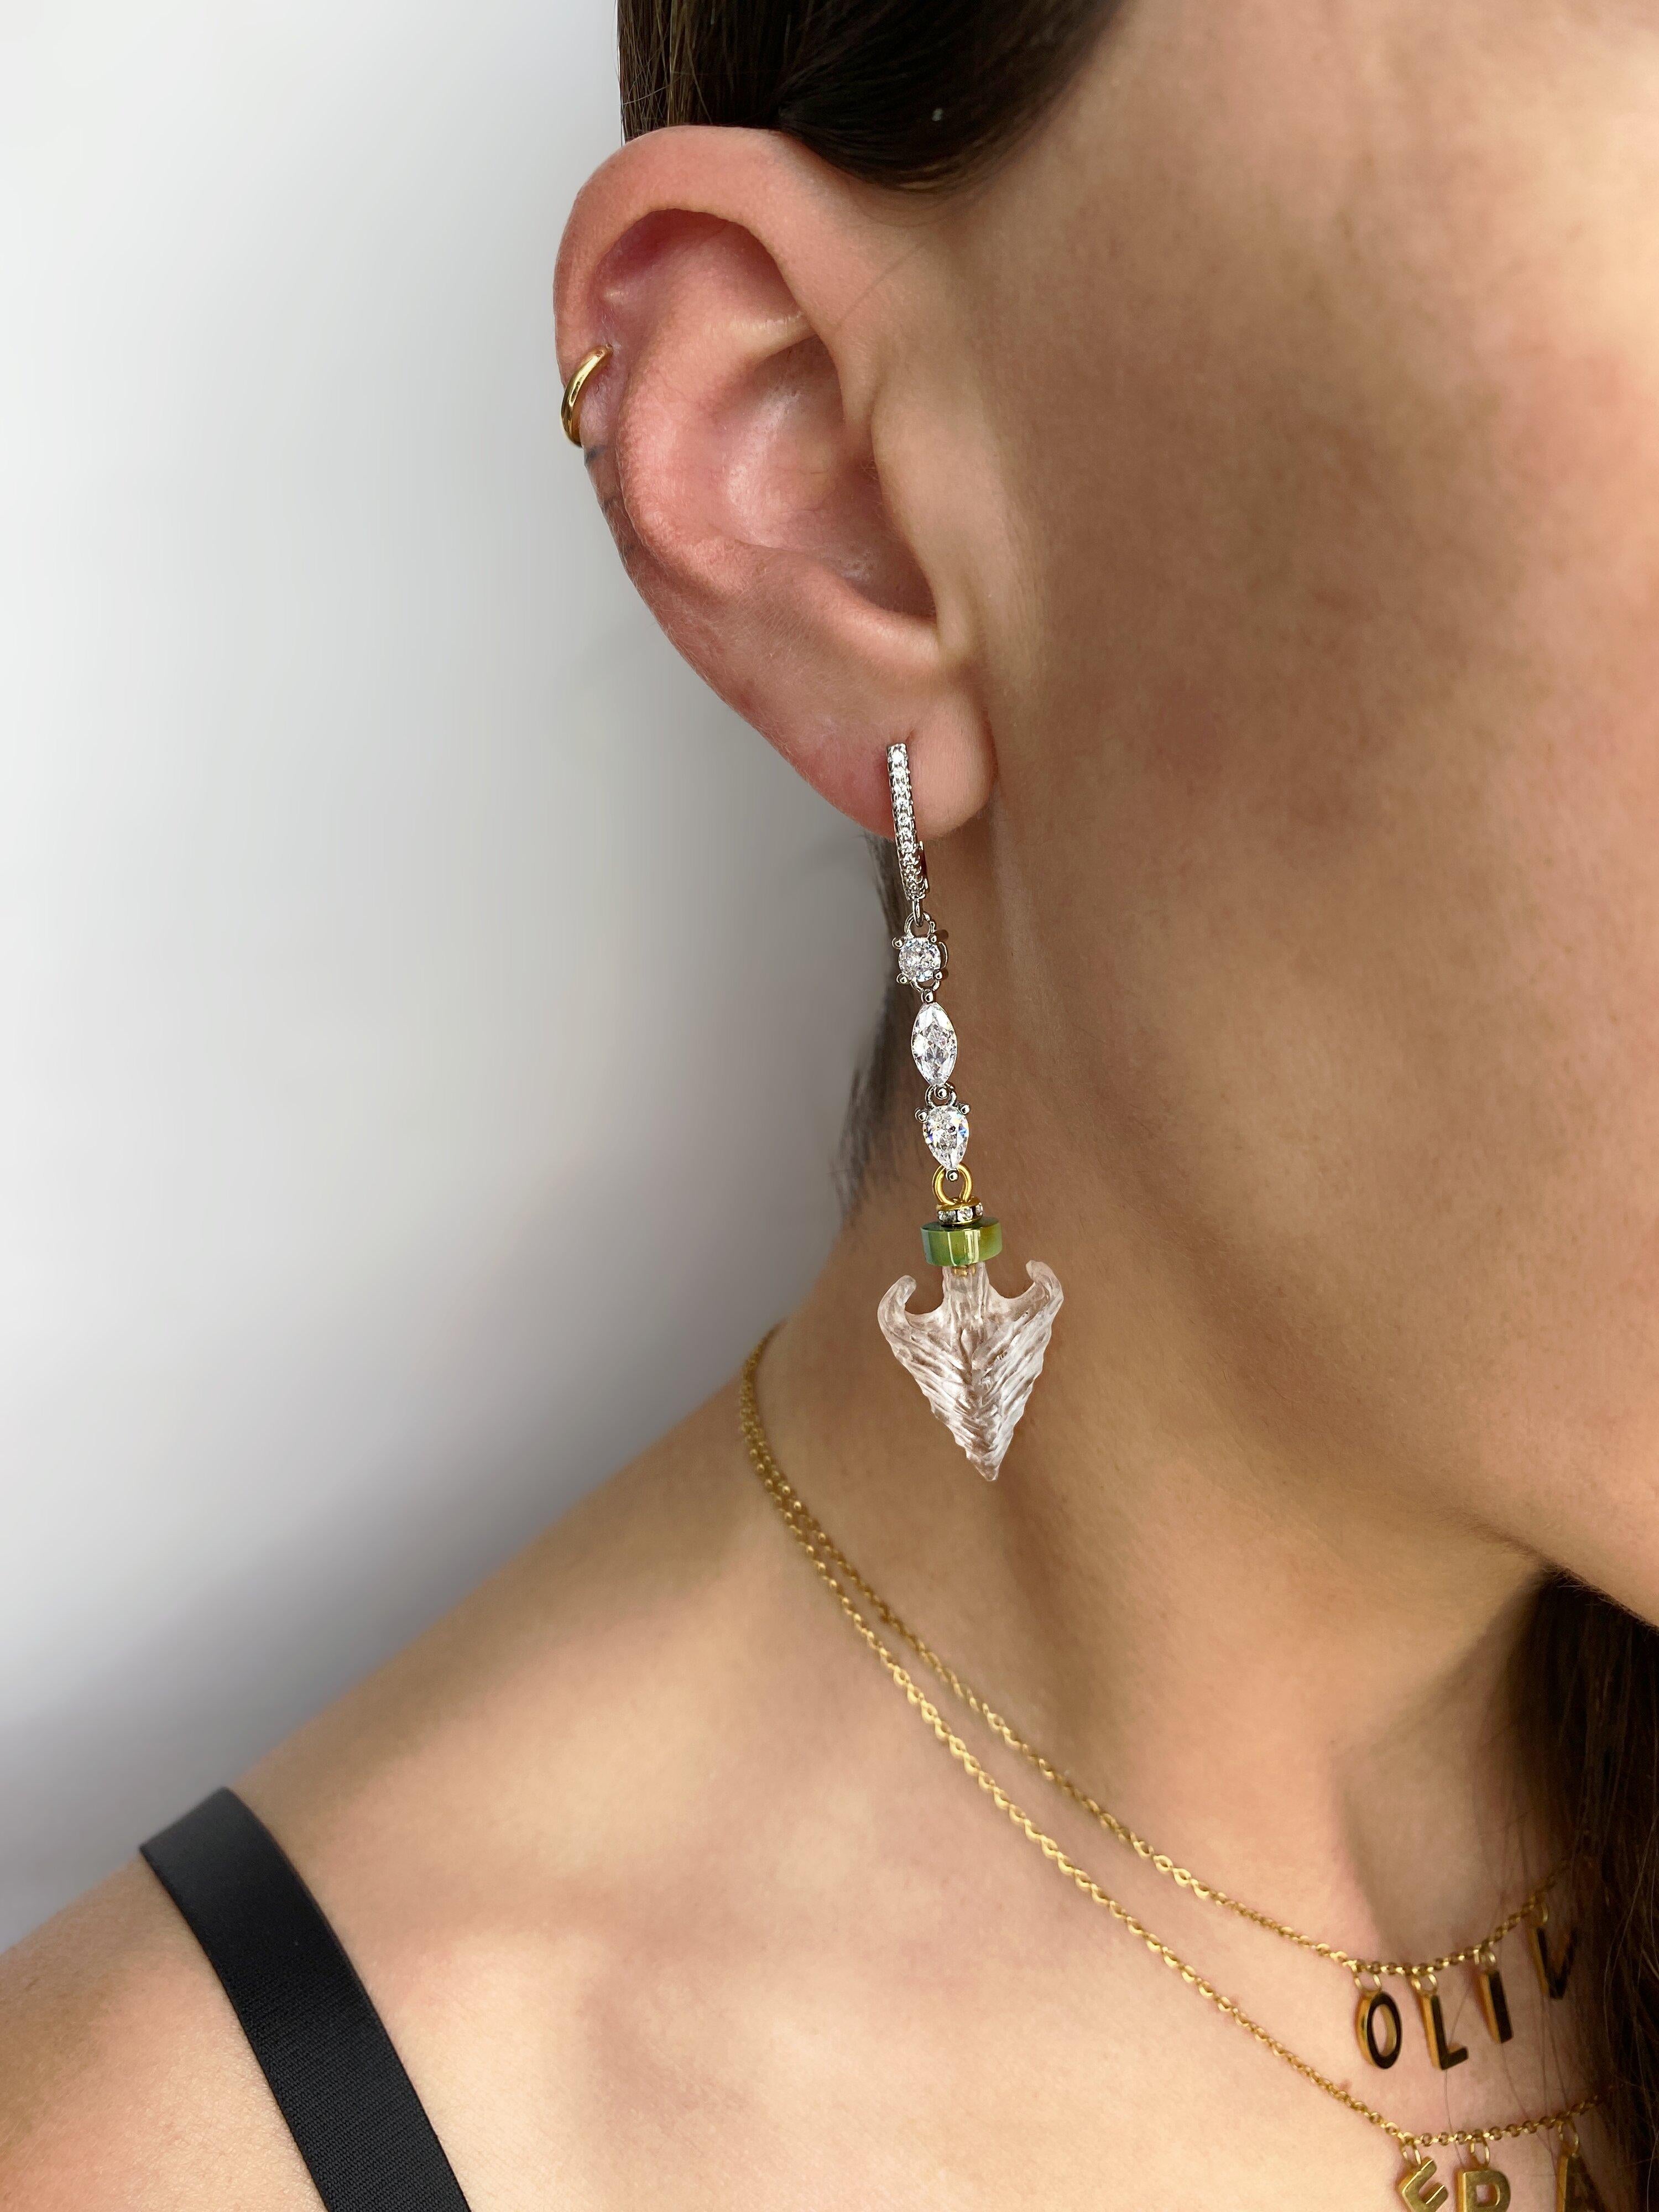 These one of a kind gold plated earrings feature full cut crystal chain with a hanging hand carved Lucite anchor set with natural Turquoise. Lightweight and elegant design by Sebastian Jaramillo.